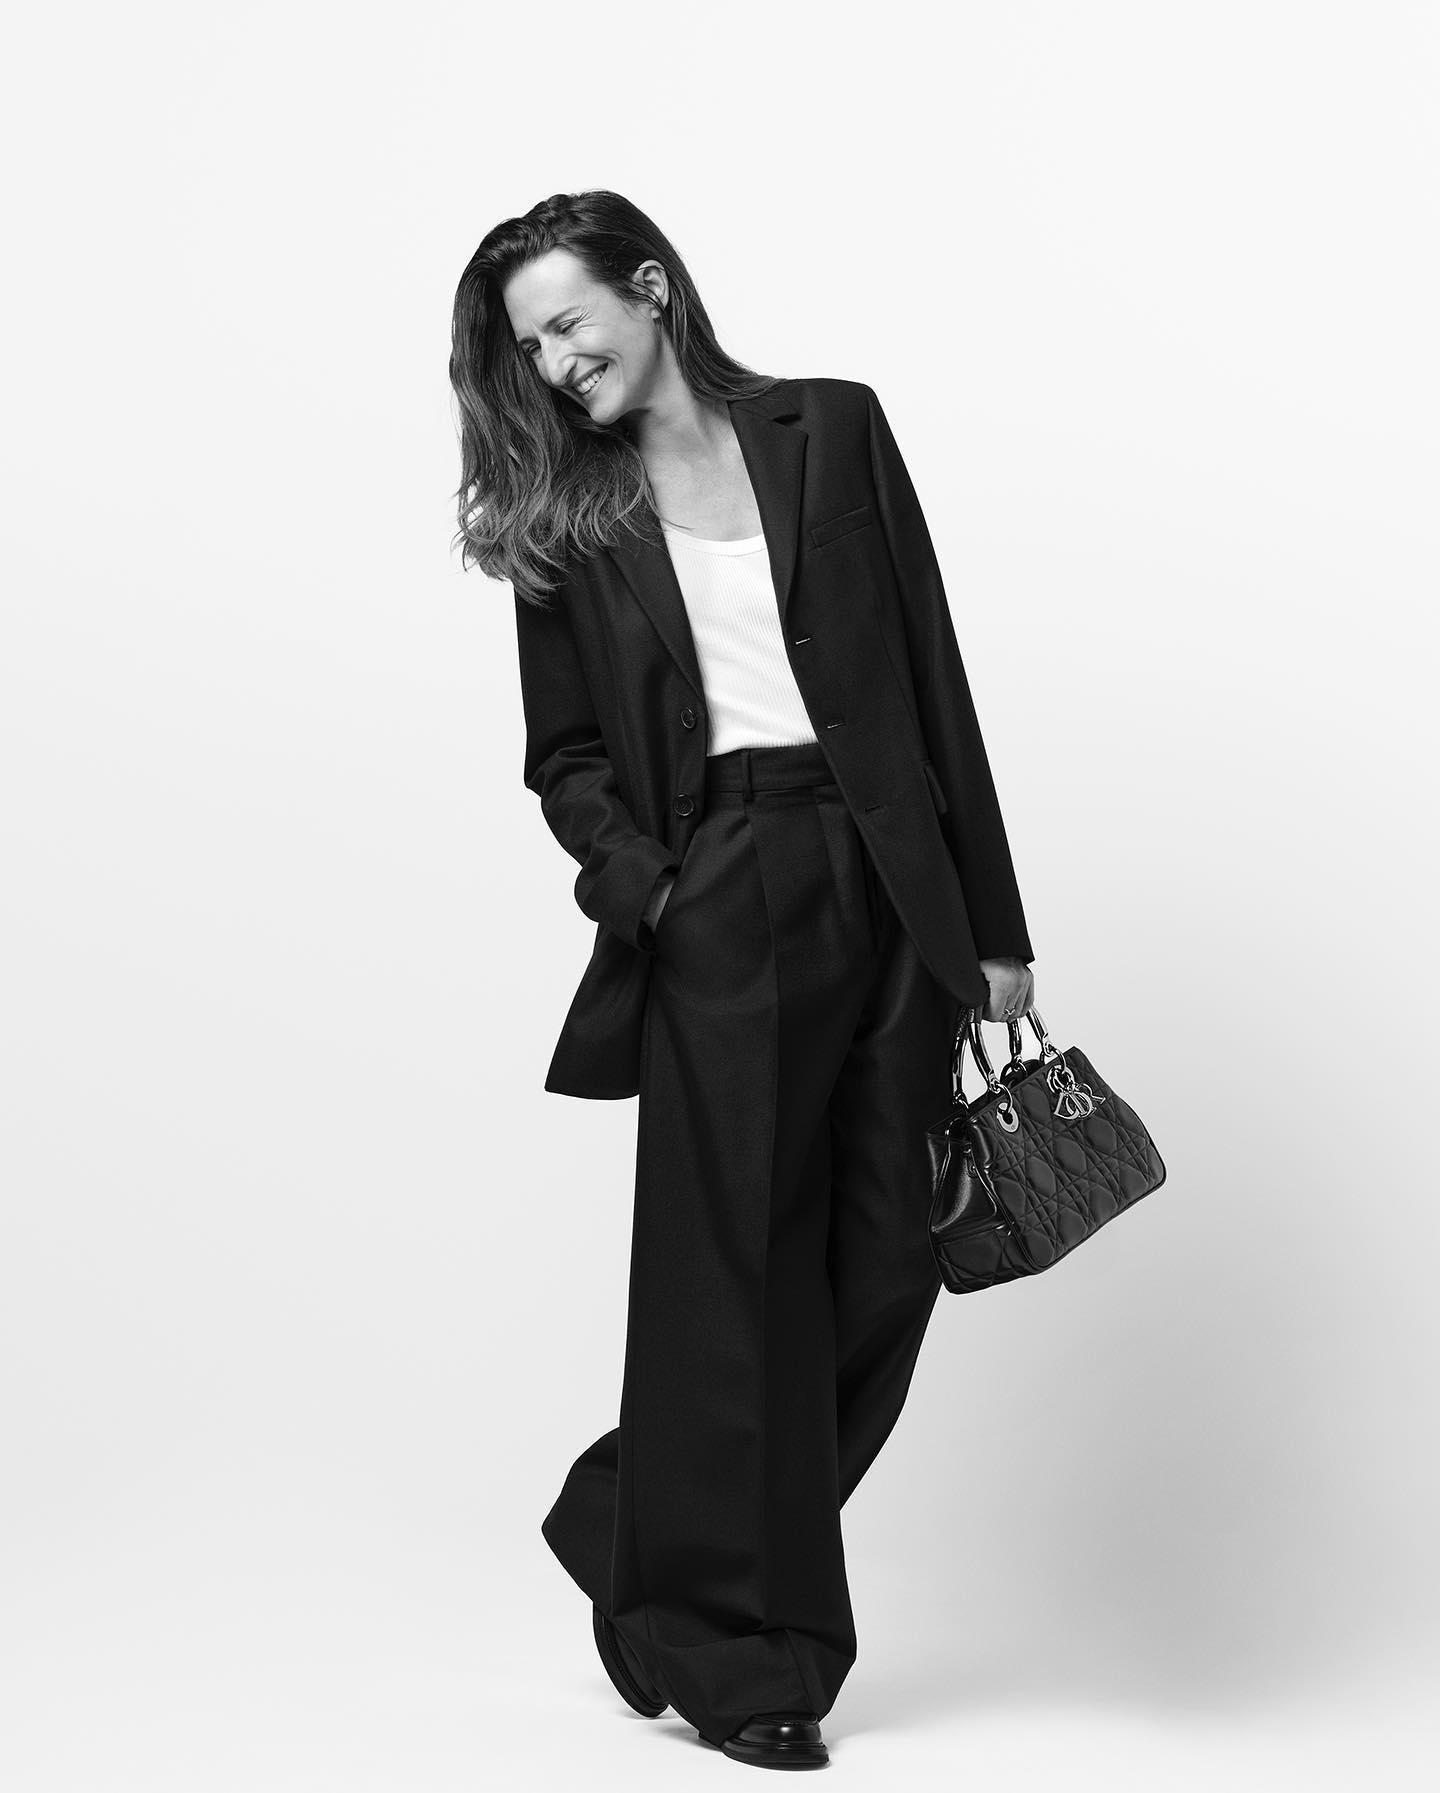 Carried by Camille Cottin, this Medium #DiorLady9522 in black is one of three sizes and two colors o